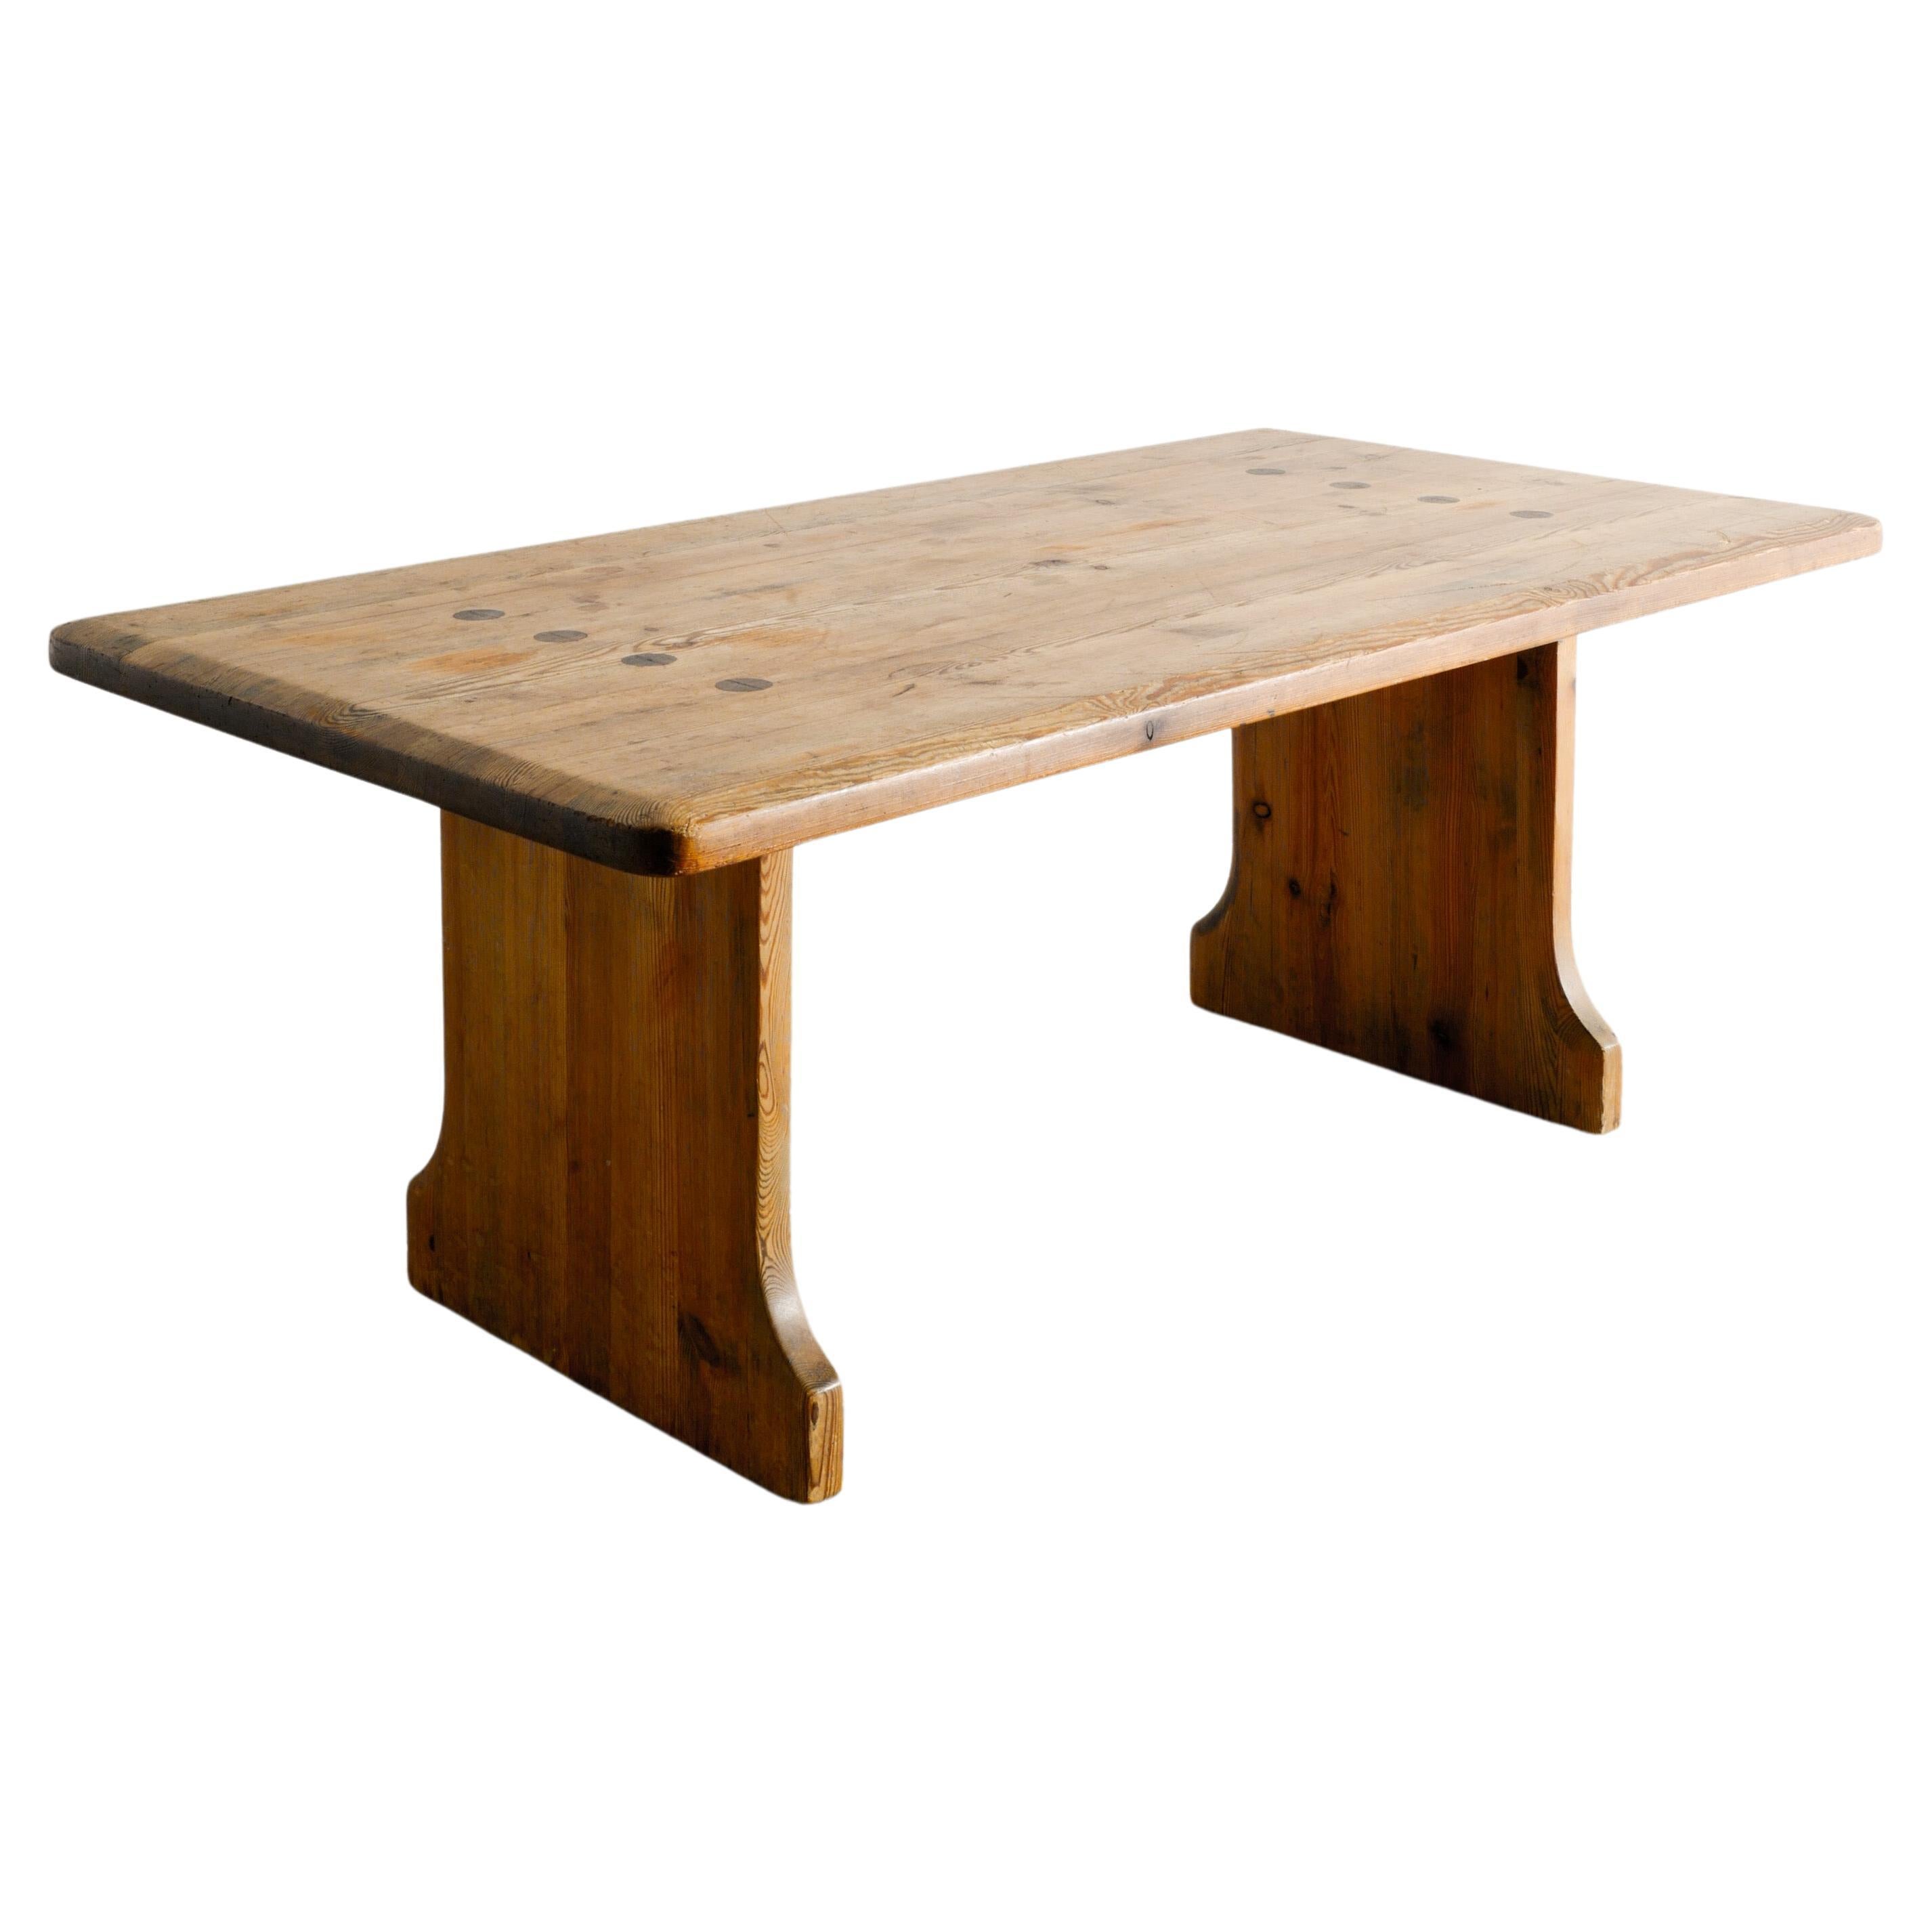 Swedish Rustic Wooden Cabin Coffee Sofa Table in Solid Pine Produced, 1930s  For Sale